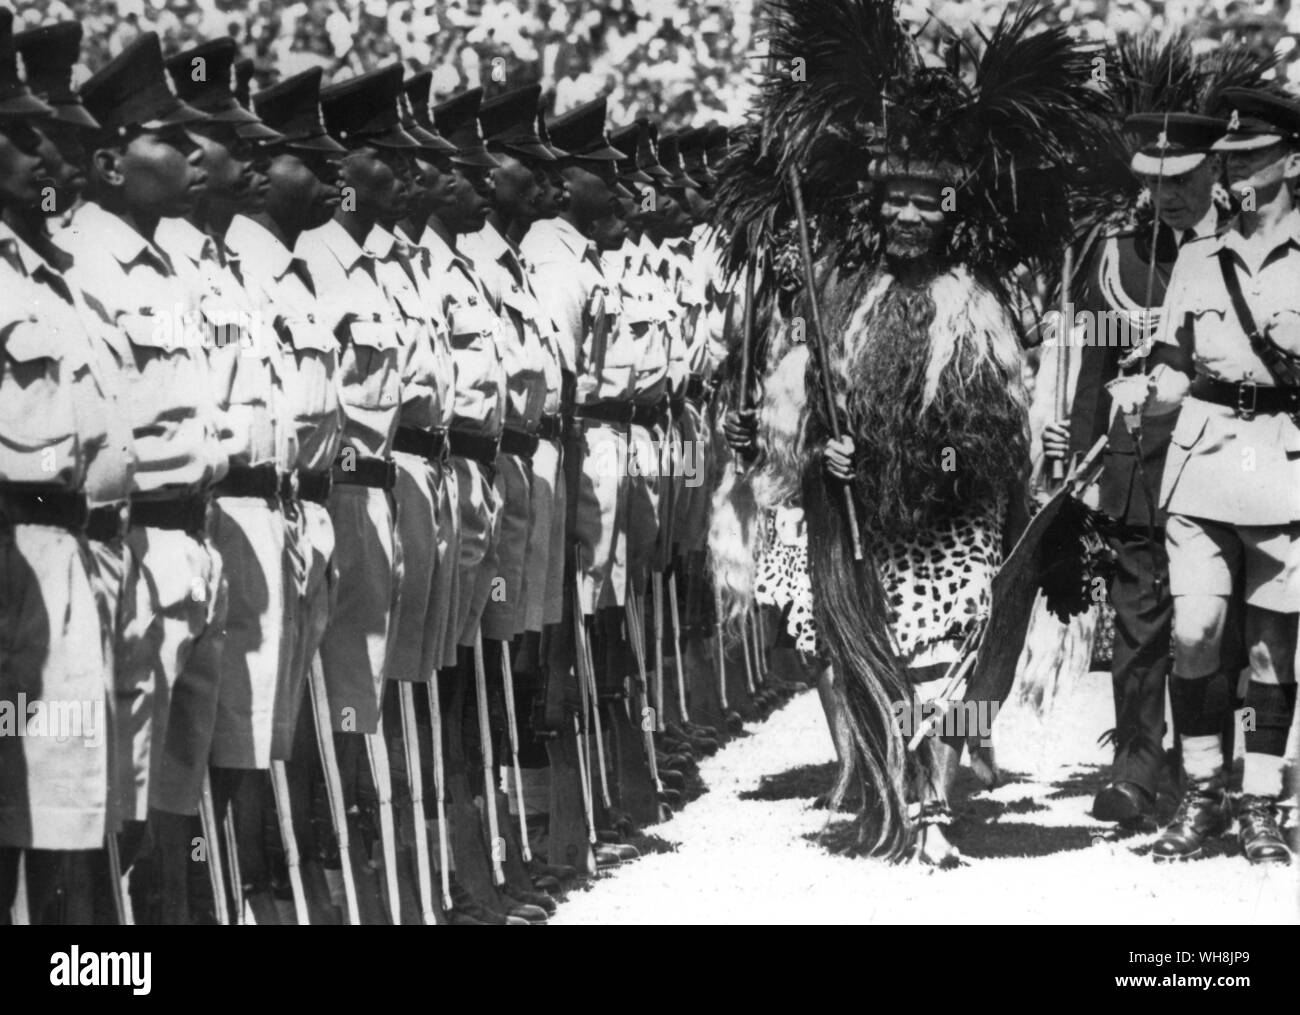 King Sobuza II wearing traditional national dress inspects members of the 1st Battalion Malawi rifles during the Swaziland Independence Celebrations in Mabane the Capital 6 September 1968 Stock Photo